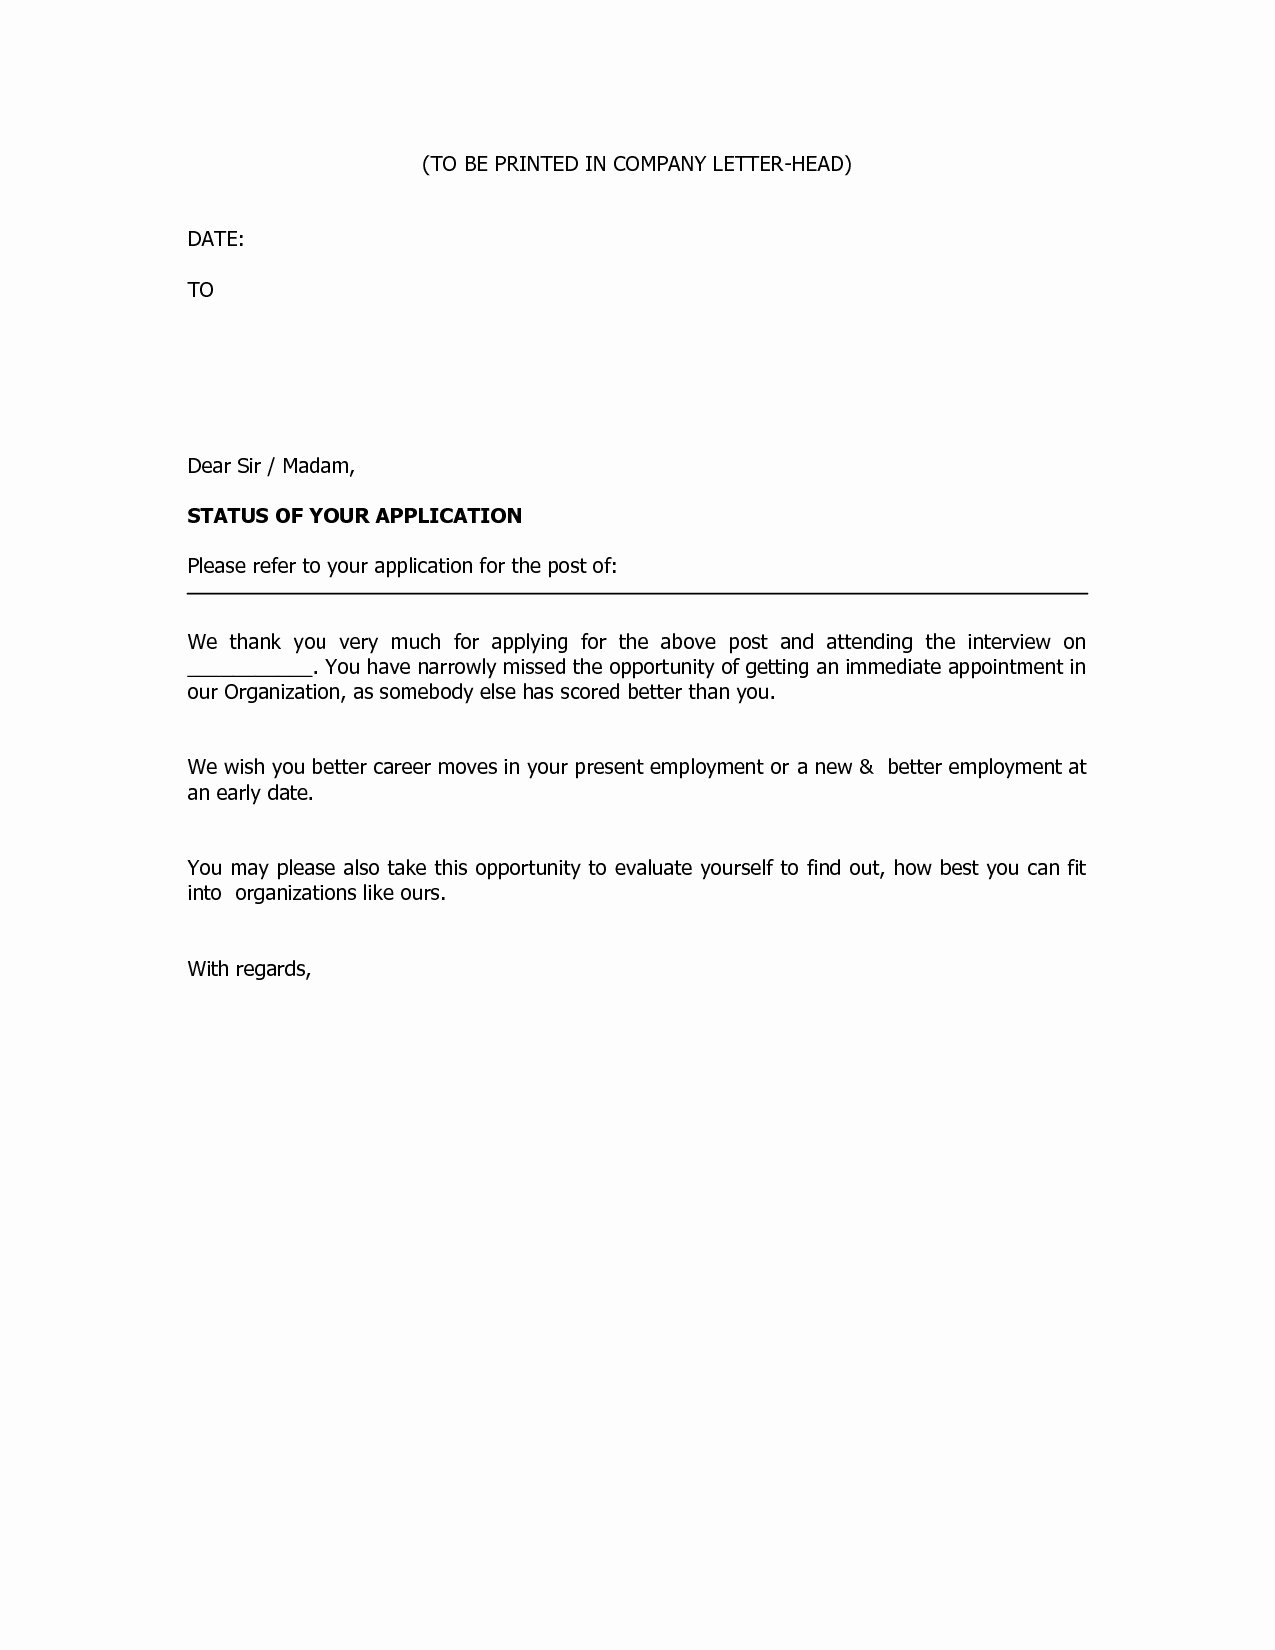 Job Rejection Email Template Best Of Rejection Letter Template after Interview Collection